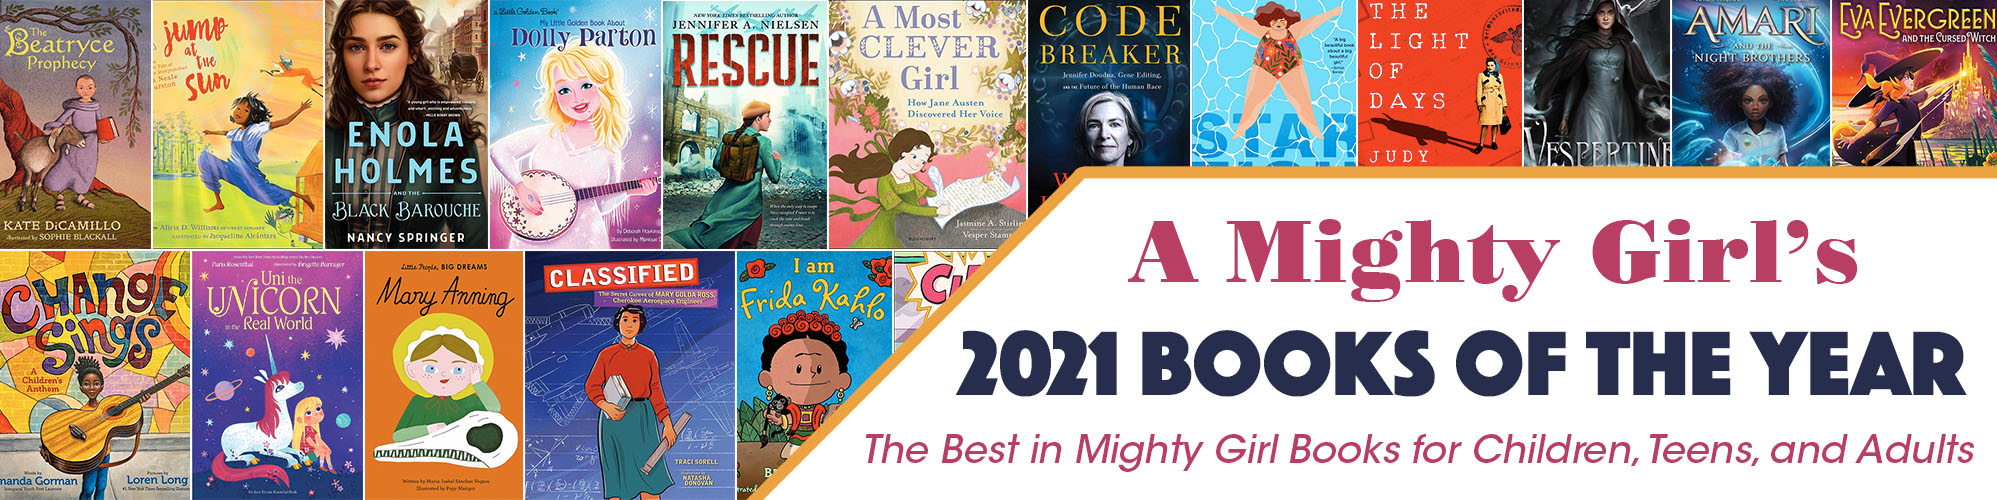 A Mighty Girl's 2021 Books of the Year